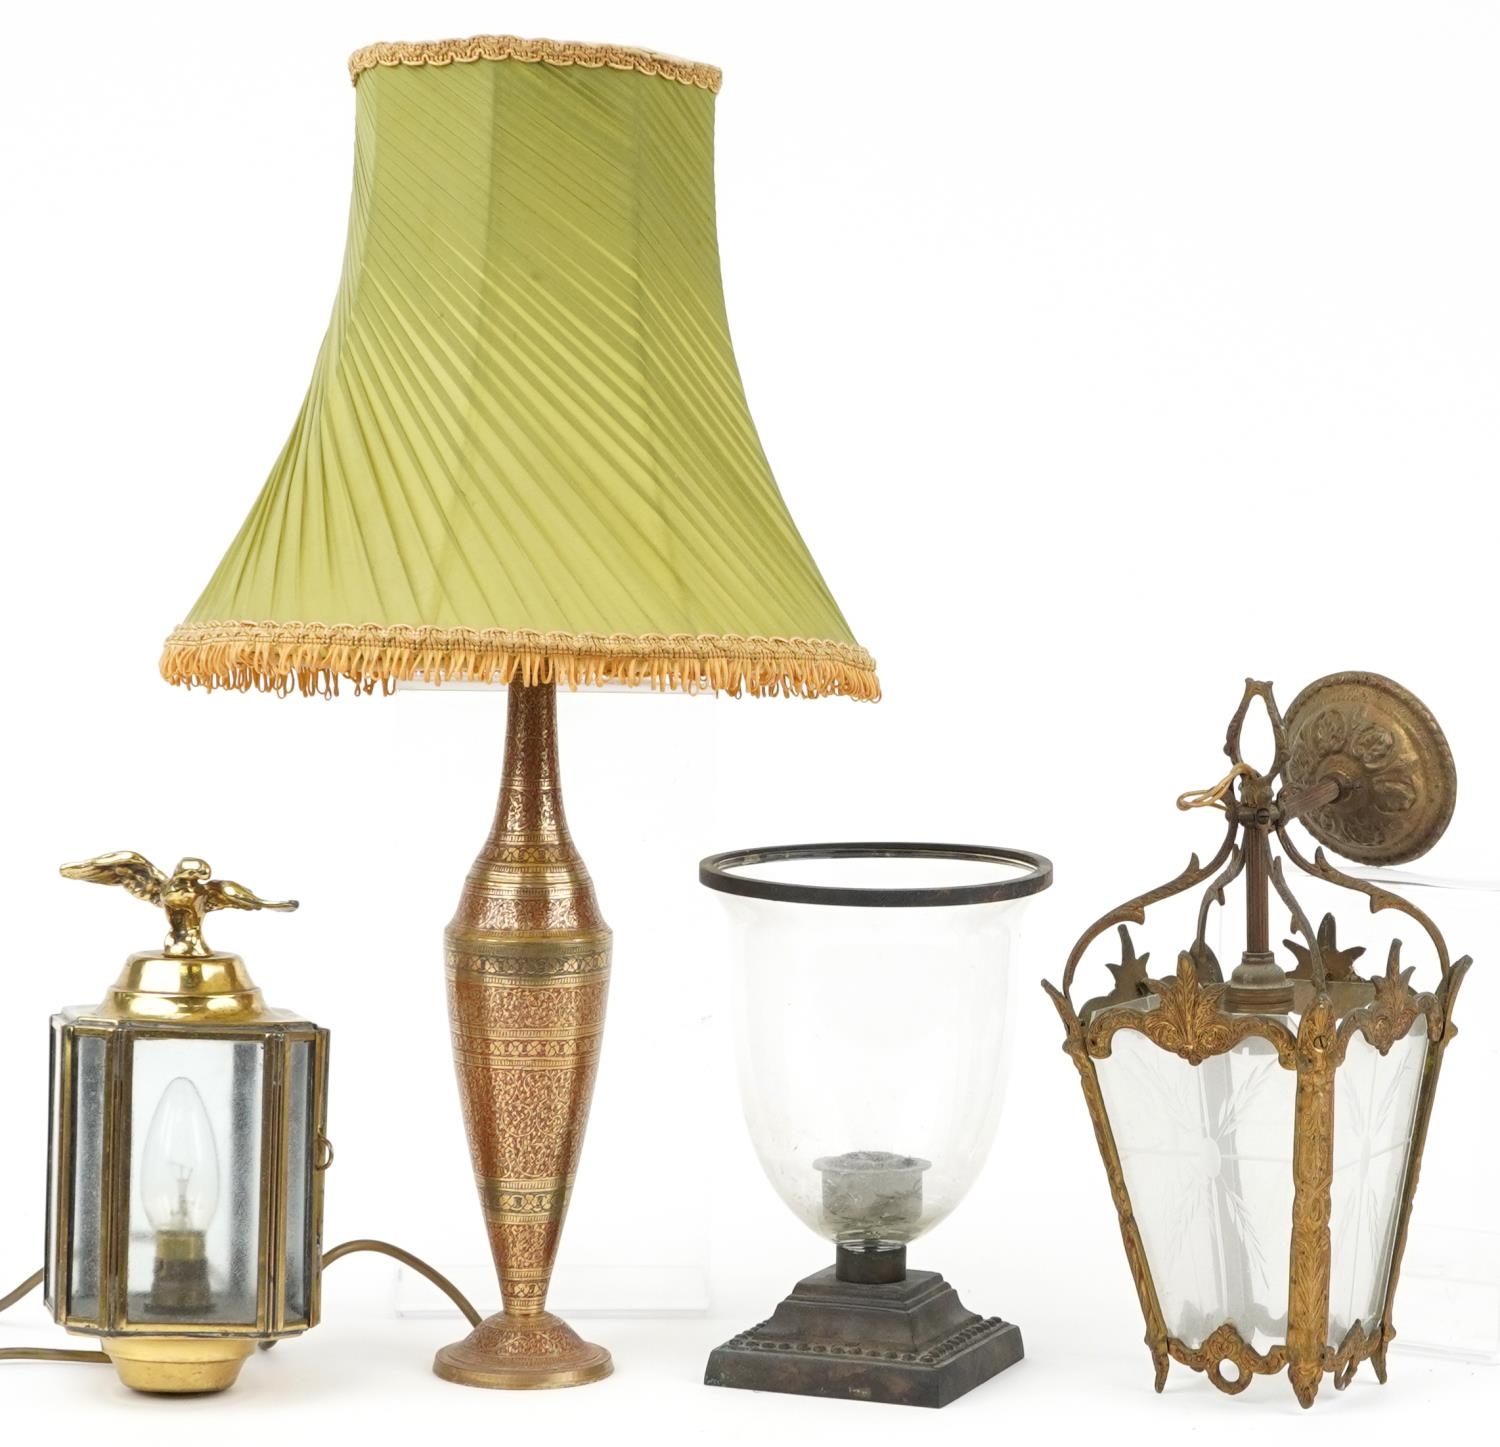 Early 20th century and later lighting including French style gilt metal light pendant with etched